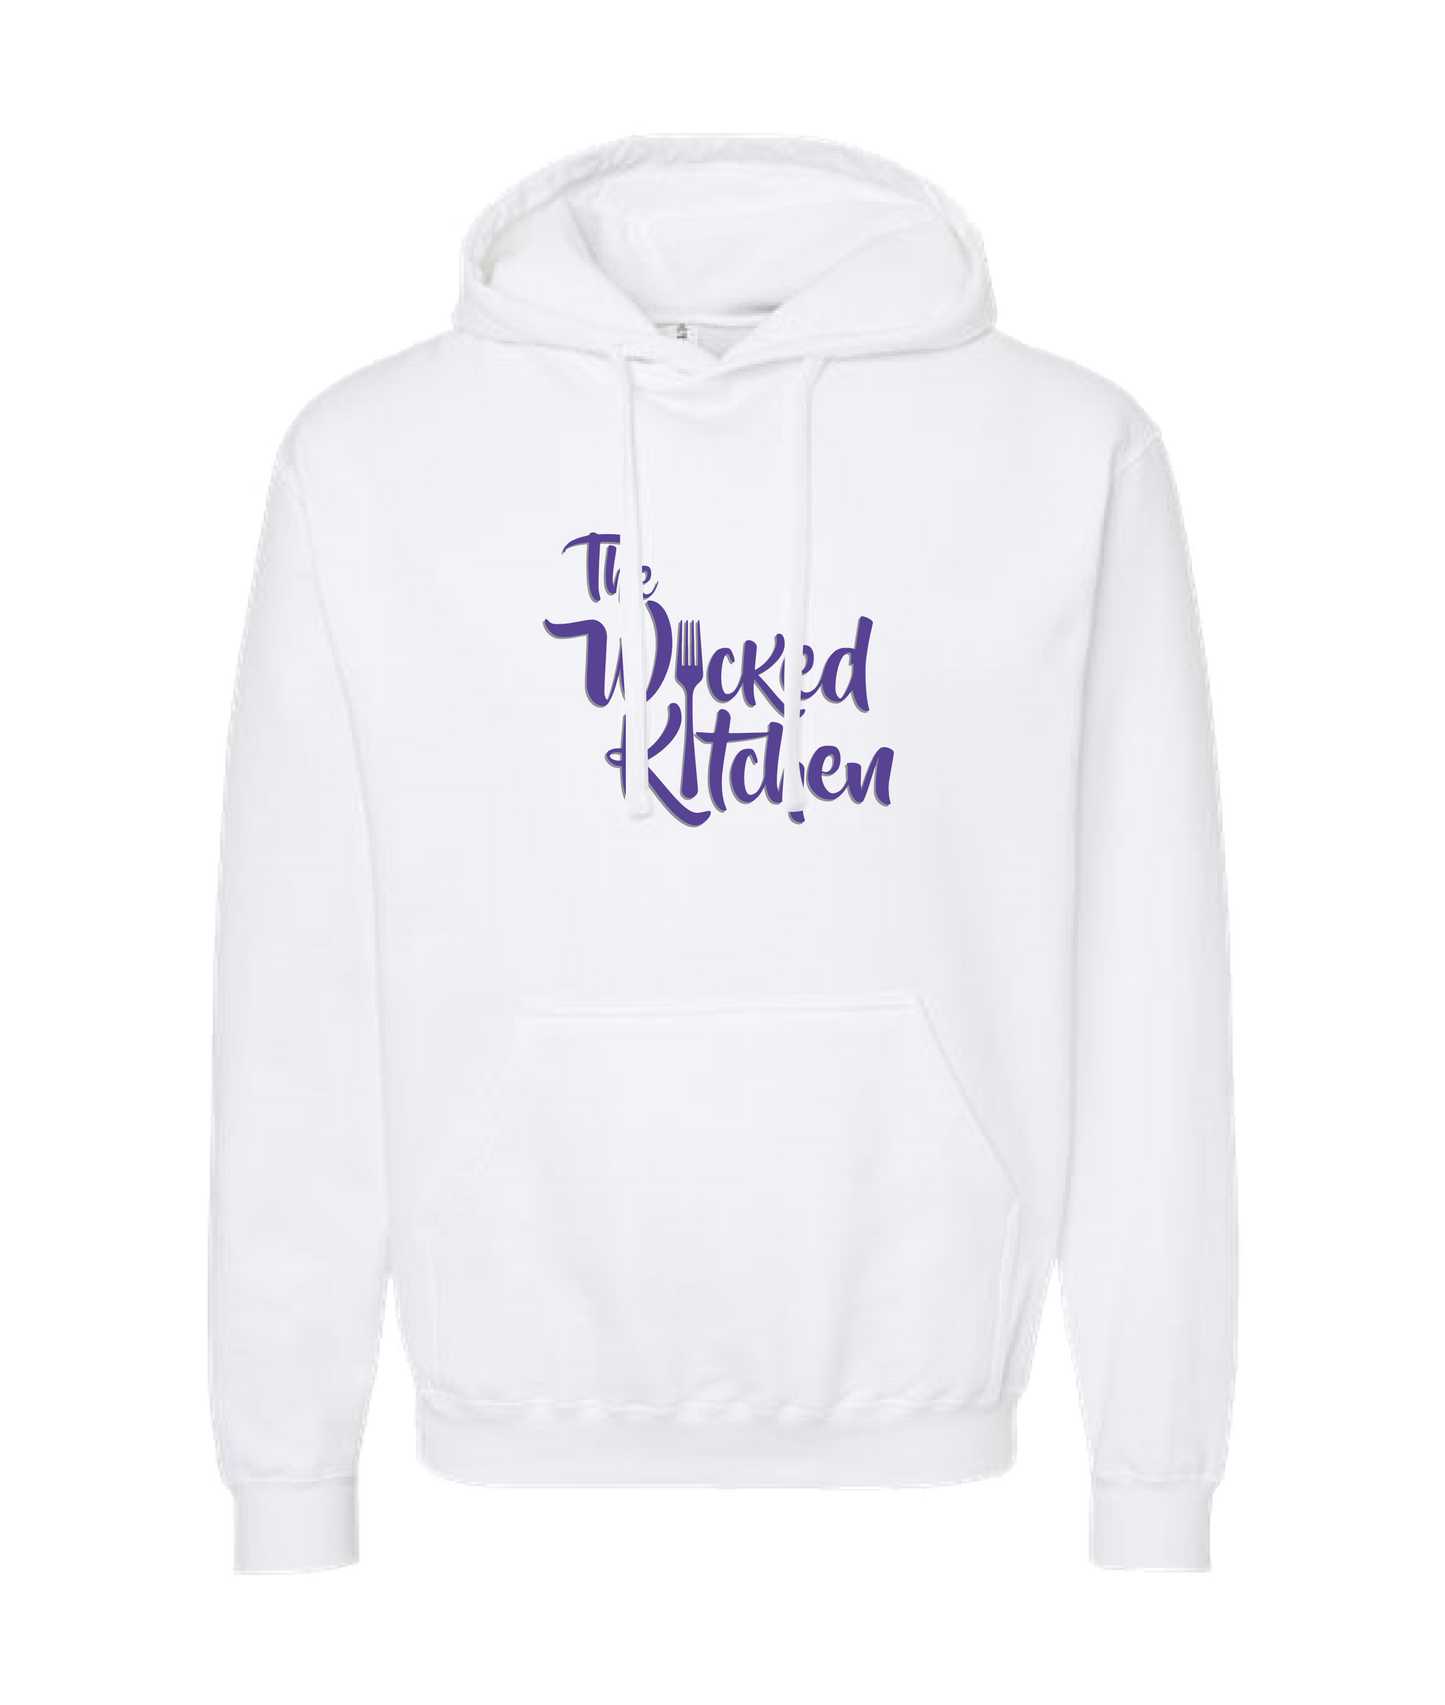 The Wicked Kitchen - 2 Sided Forks - White Hoodie